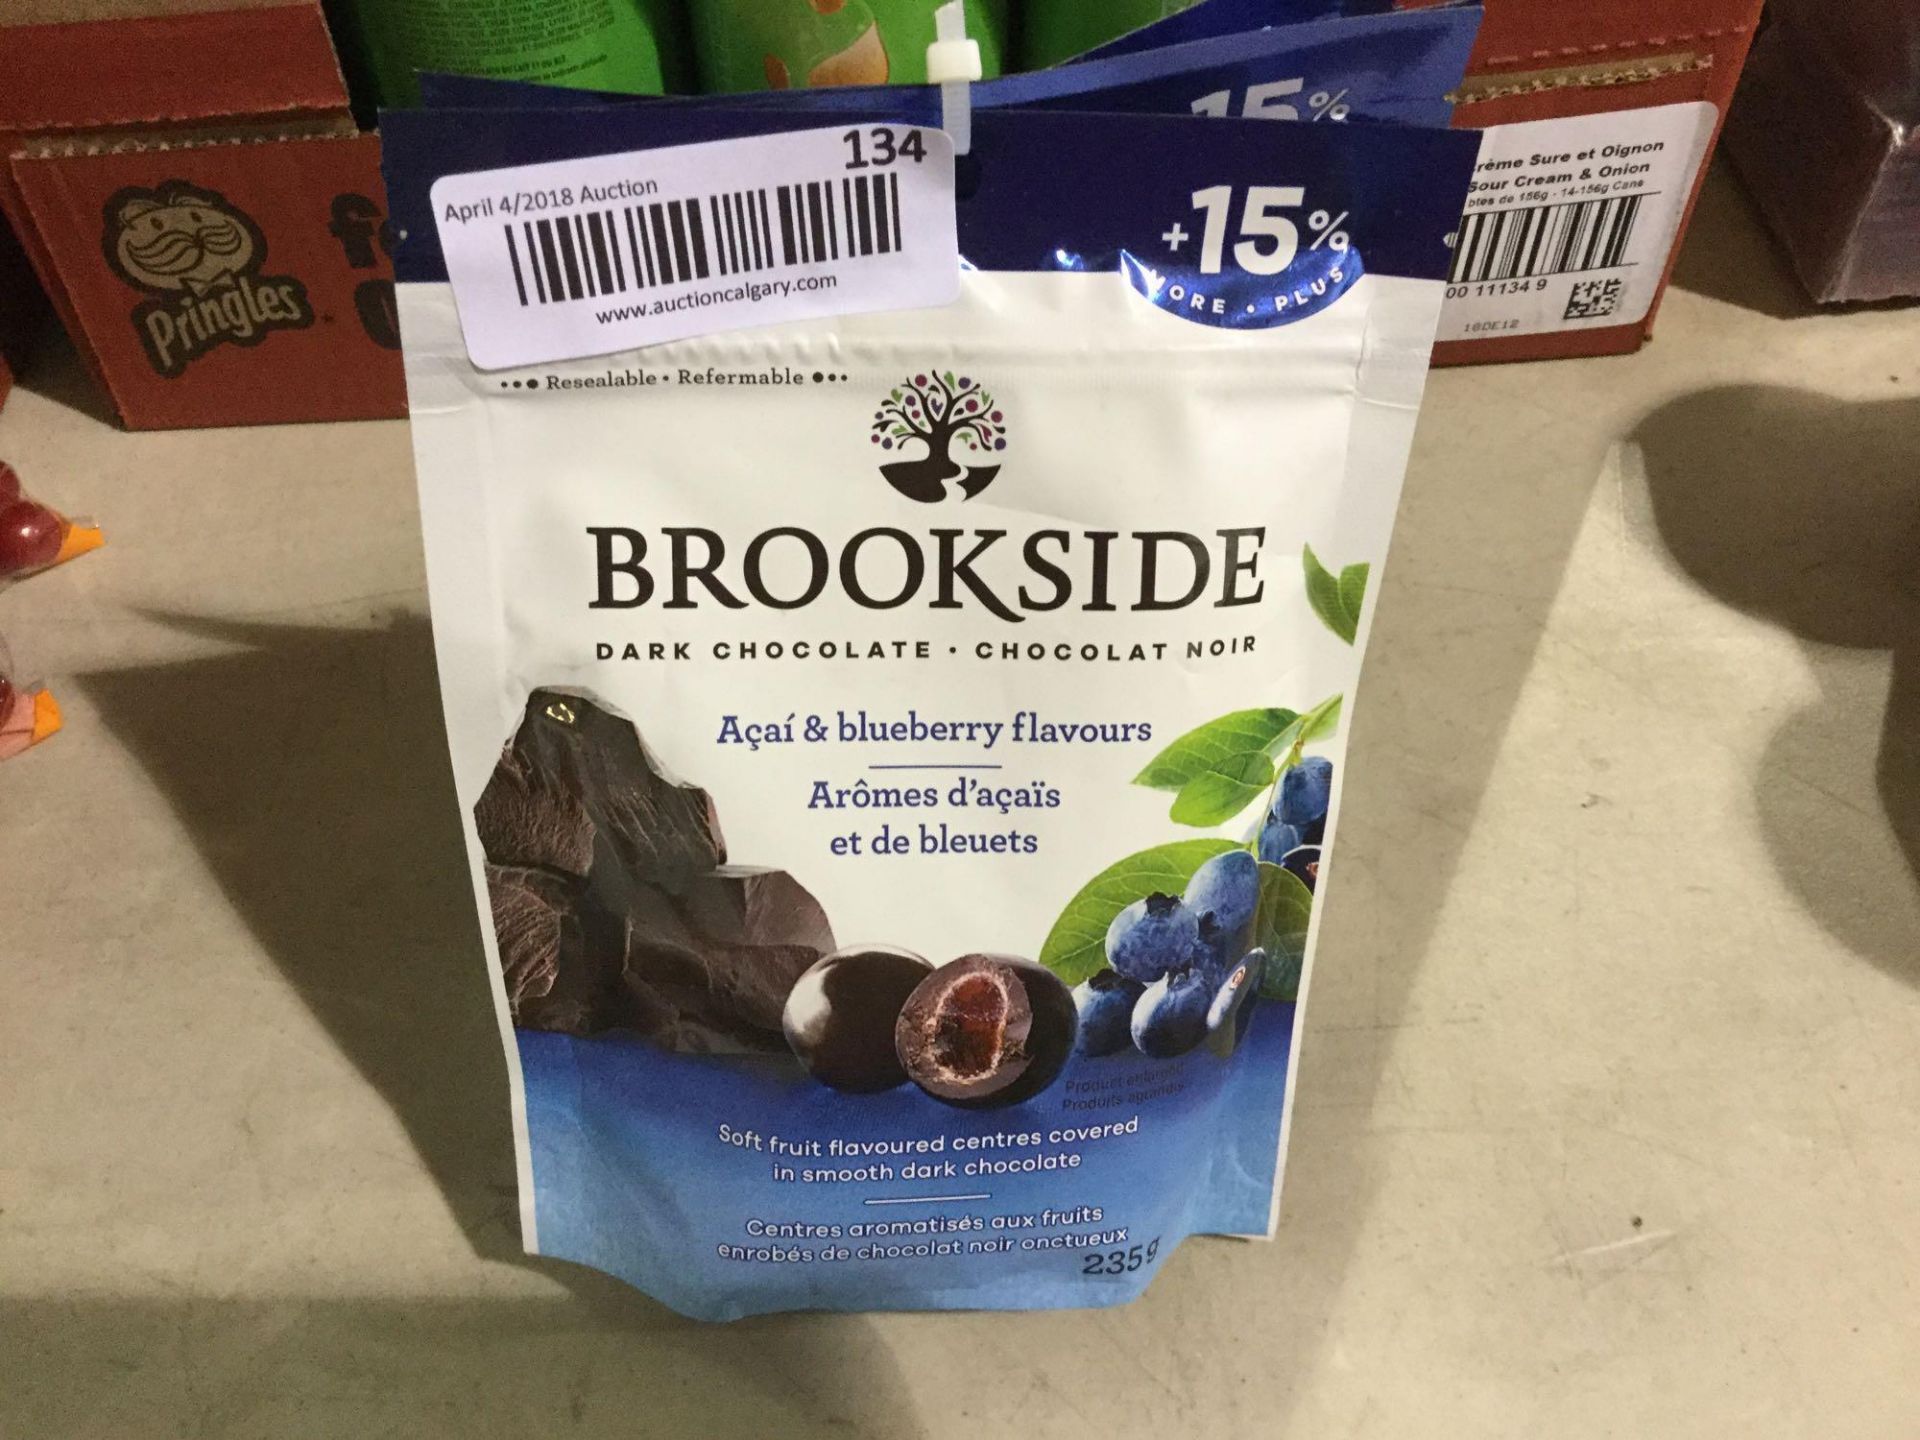 Lot of 4 x 235 g Brookside Dark Chocolate - Acai and Blueberry Flavour